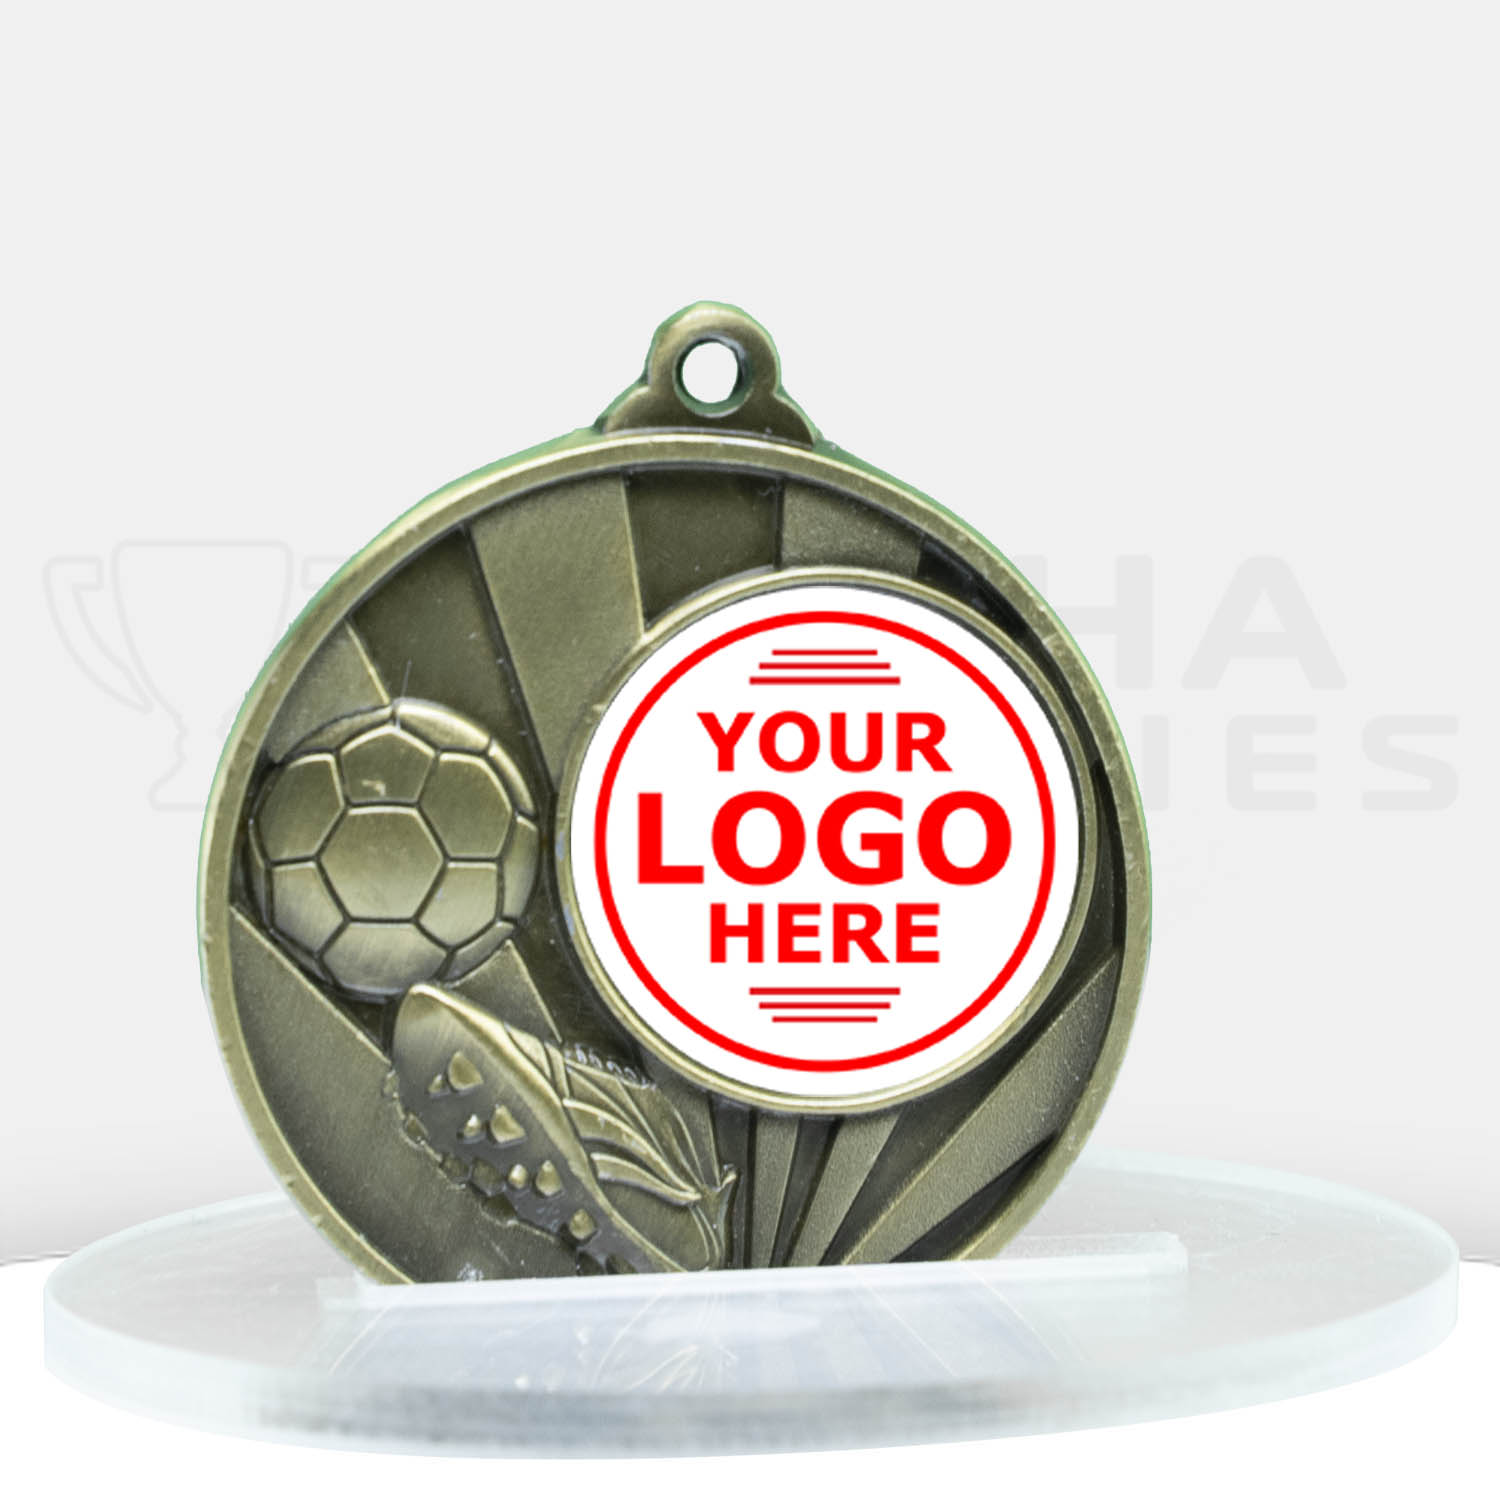 sunrise-medal-football-25mm-insert-gold-1076c-9g-front-with-logo